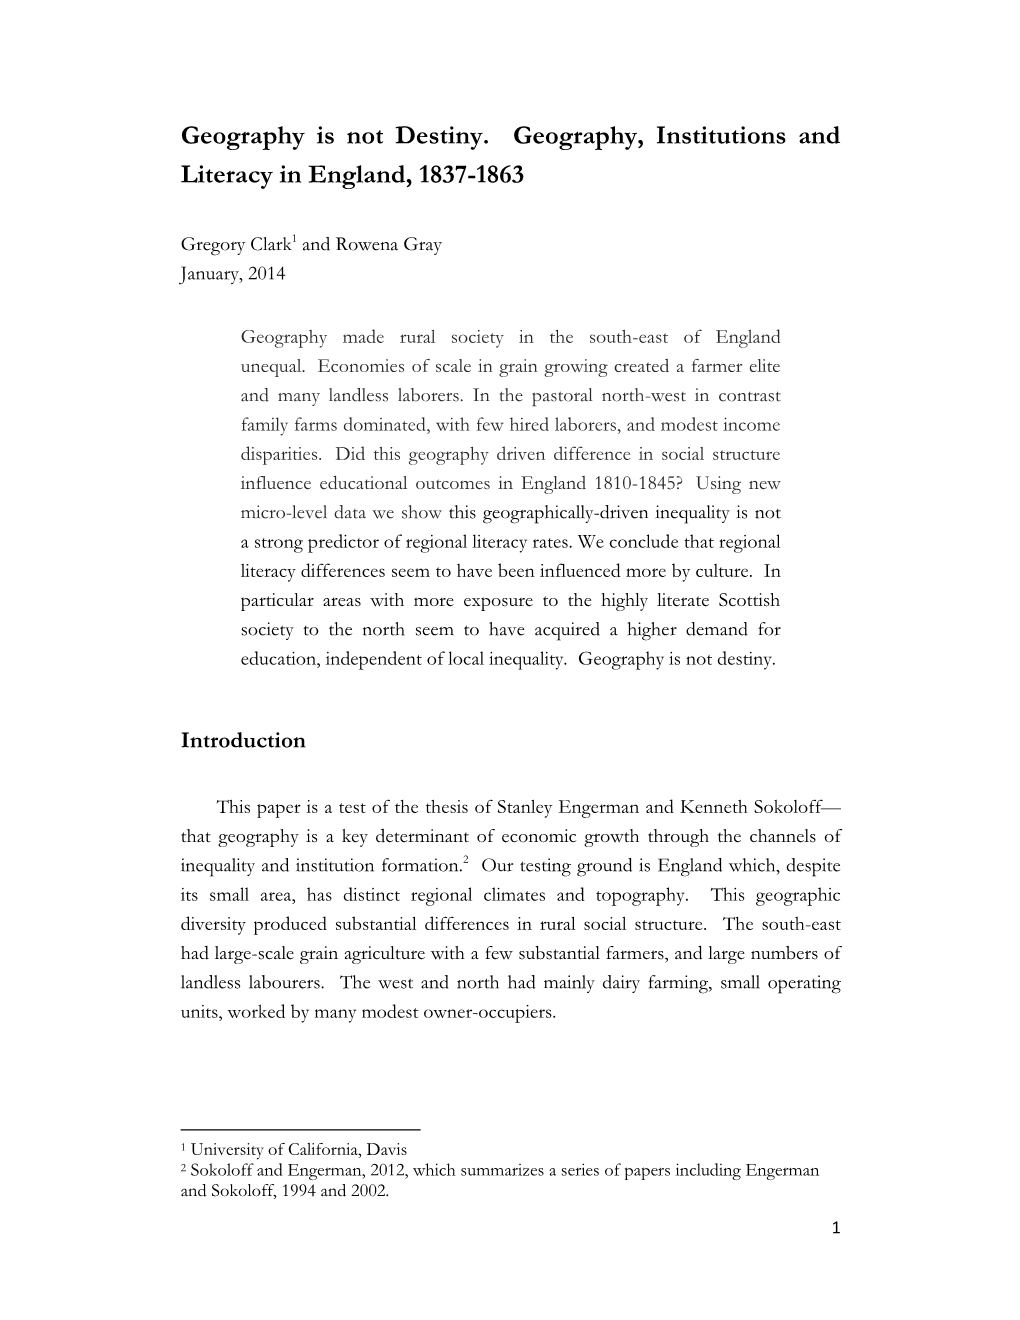 Geography Is Not Destiny. Geography, Institutions and Literacy in England, 1837-1863